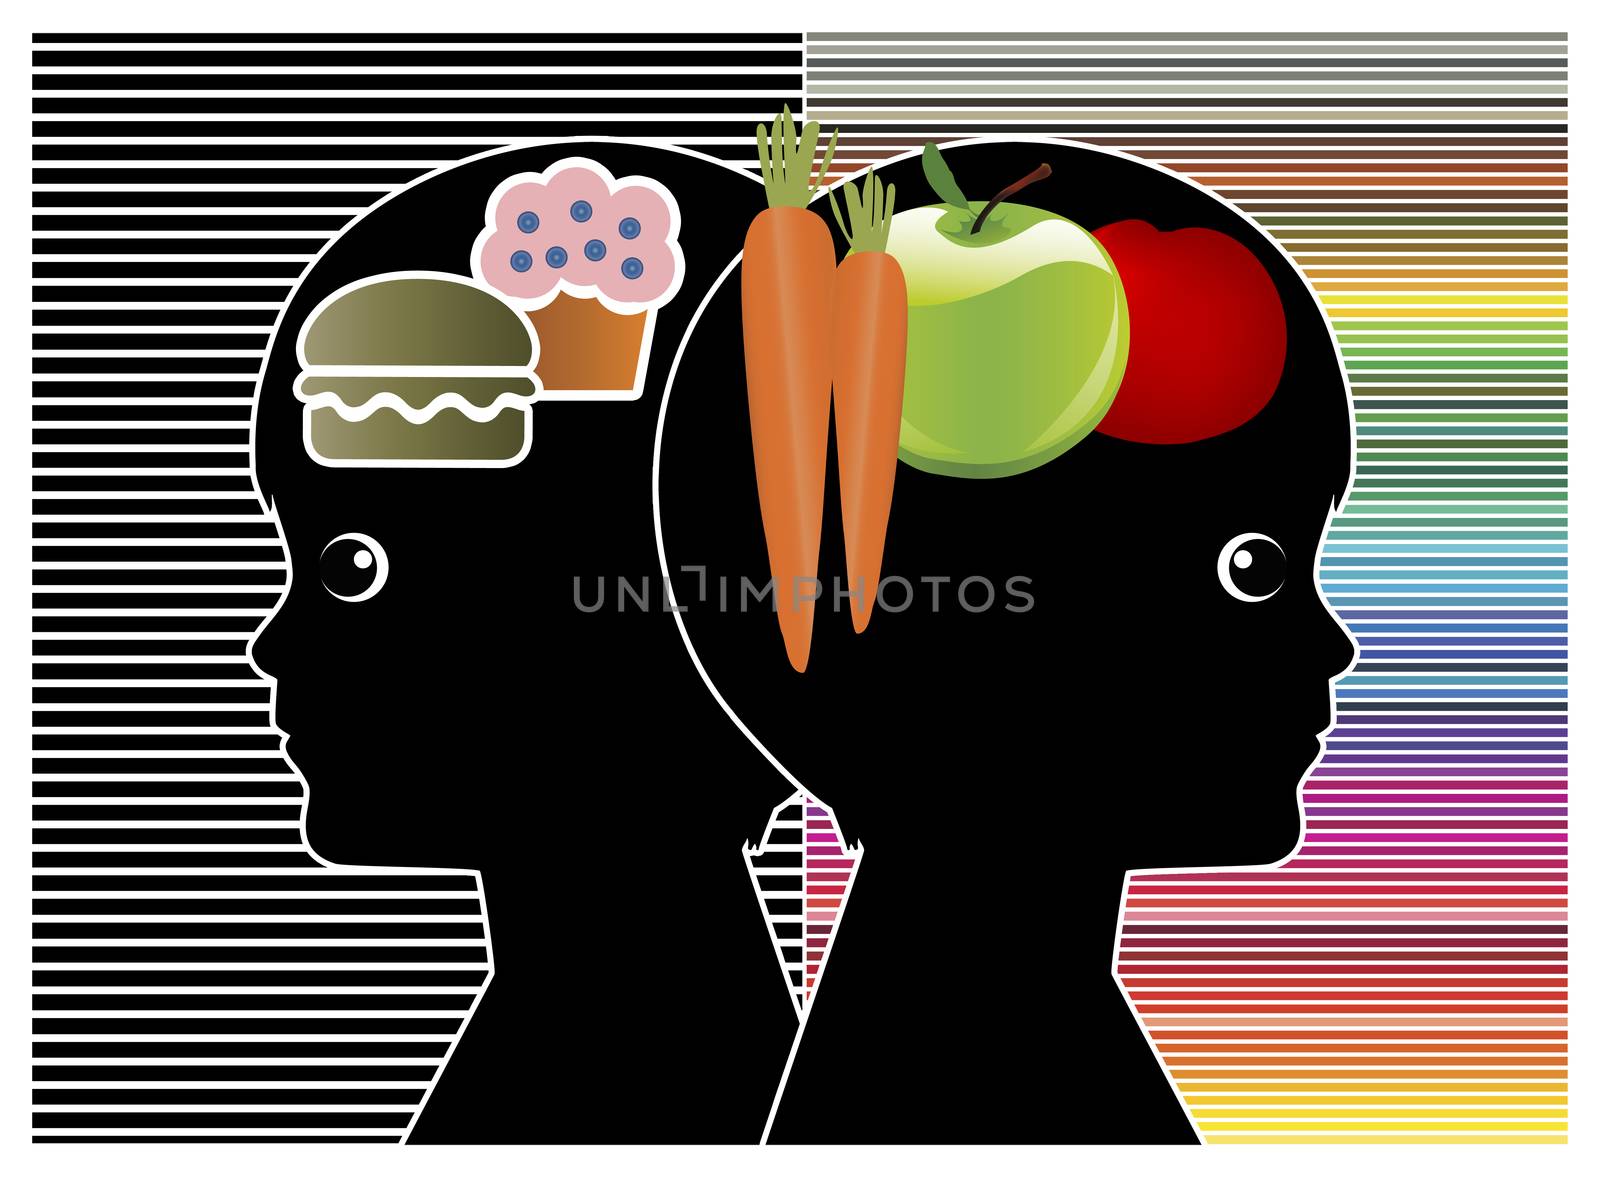 Difference between healthy and junk food affecting the brain activities and performance